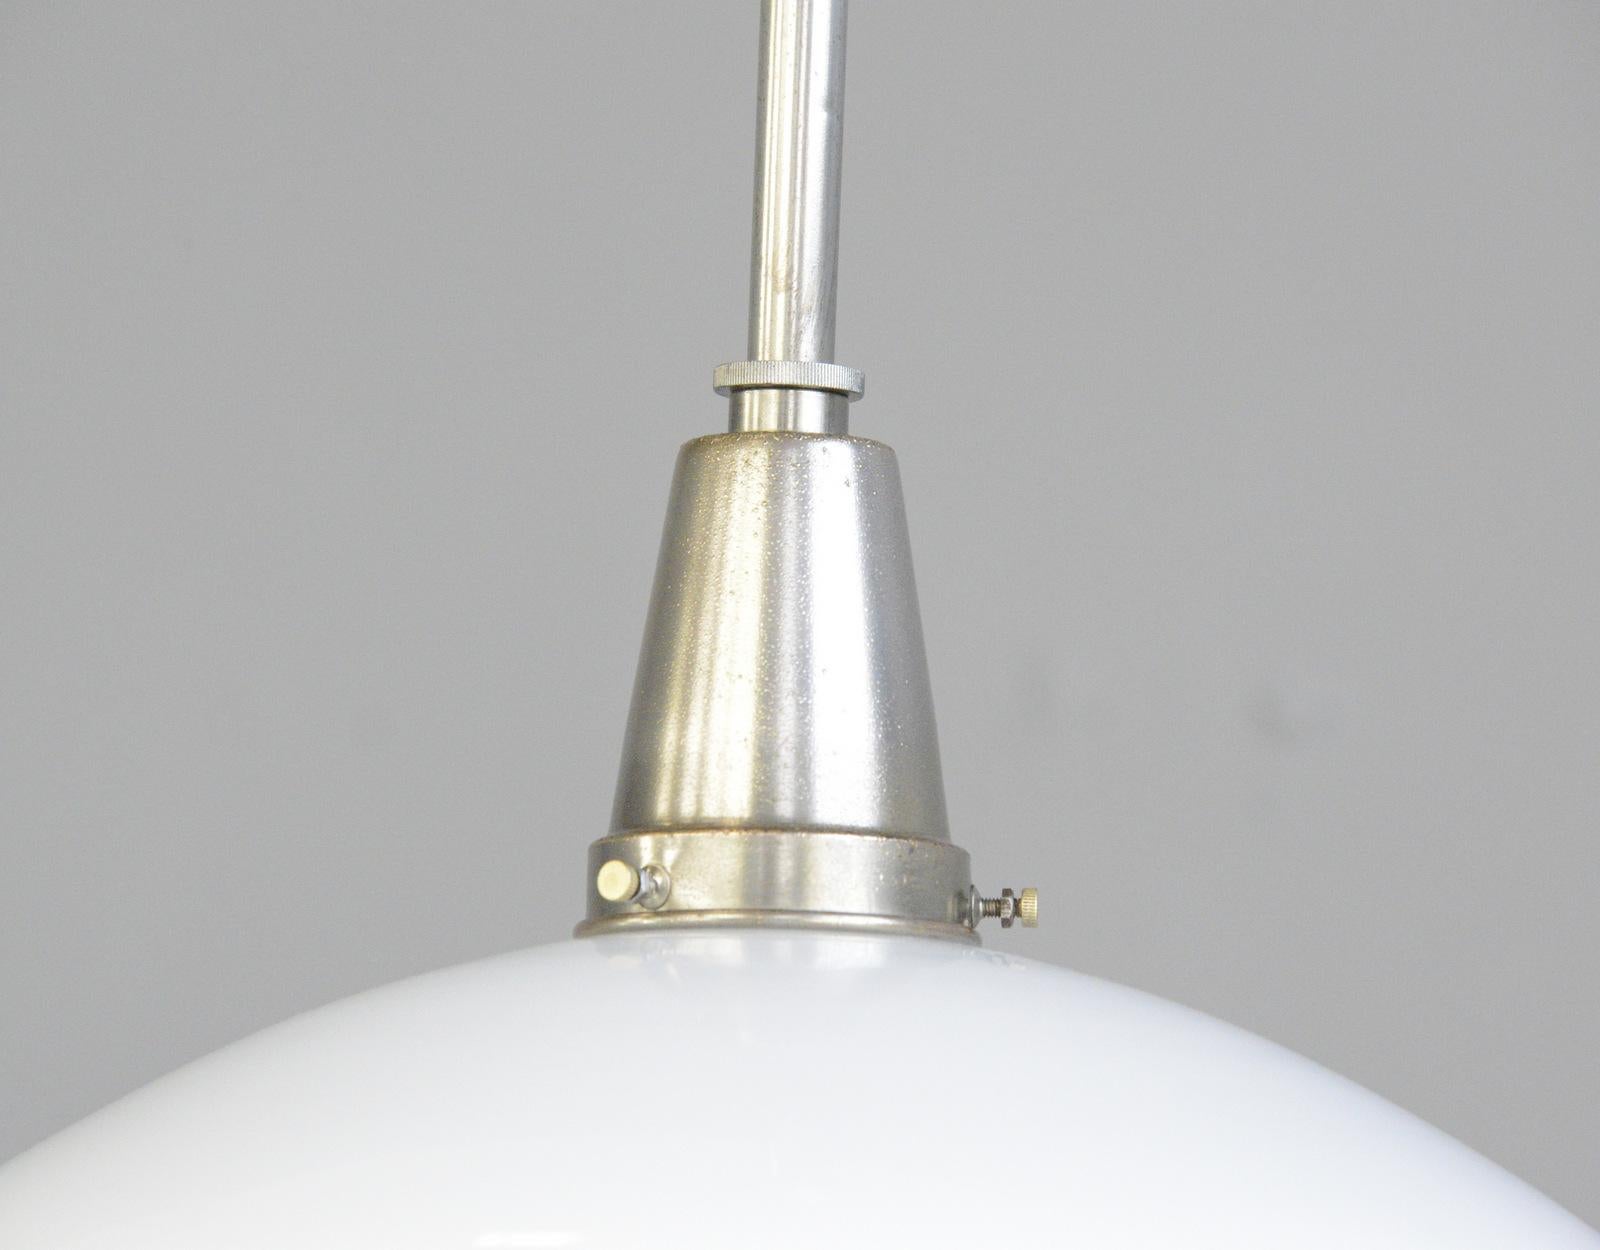 Sistrah pendant light by Otto Muller, circa 1930s

- Original nickel coated brass gallery and stem
- Opaline glass top with stepped glass base
- Takes E27 fitting bulbs
- Designed by Otto Muller for Sistrah
- German, 1930s
- Measures: 32cm